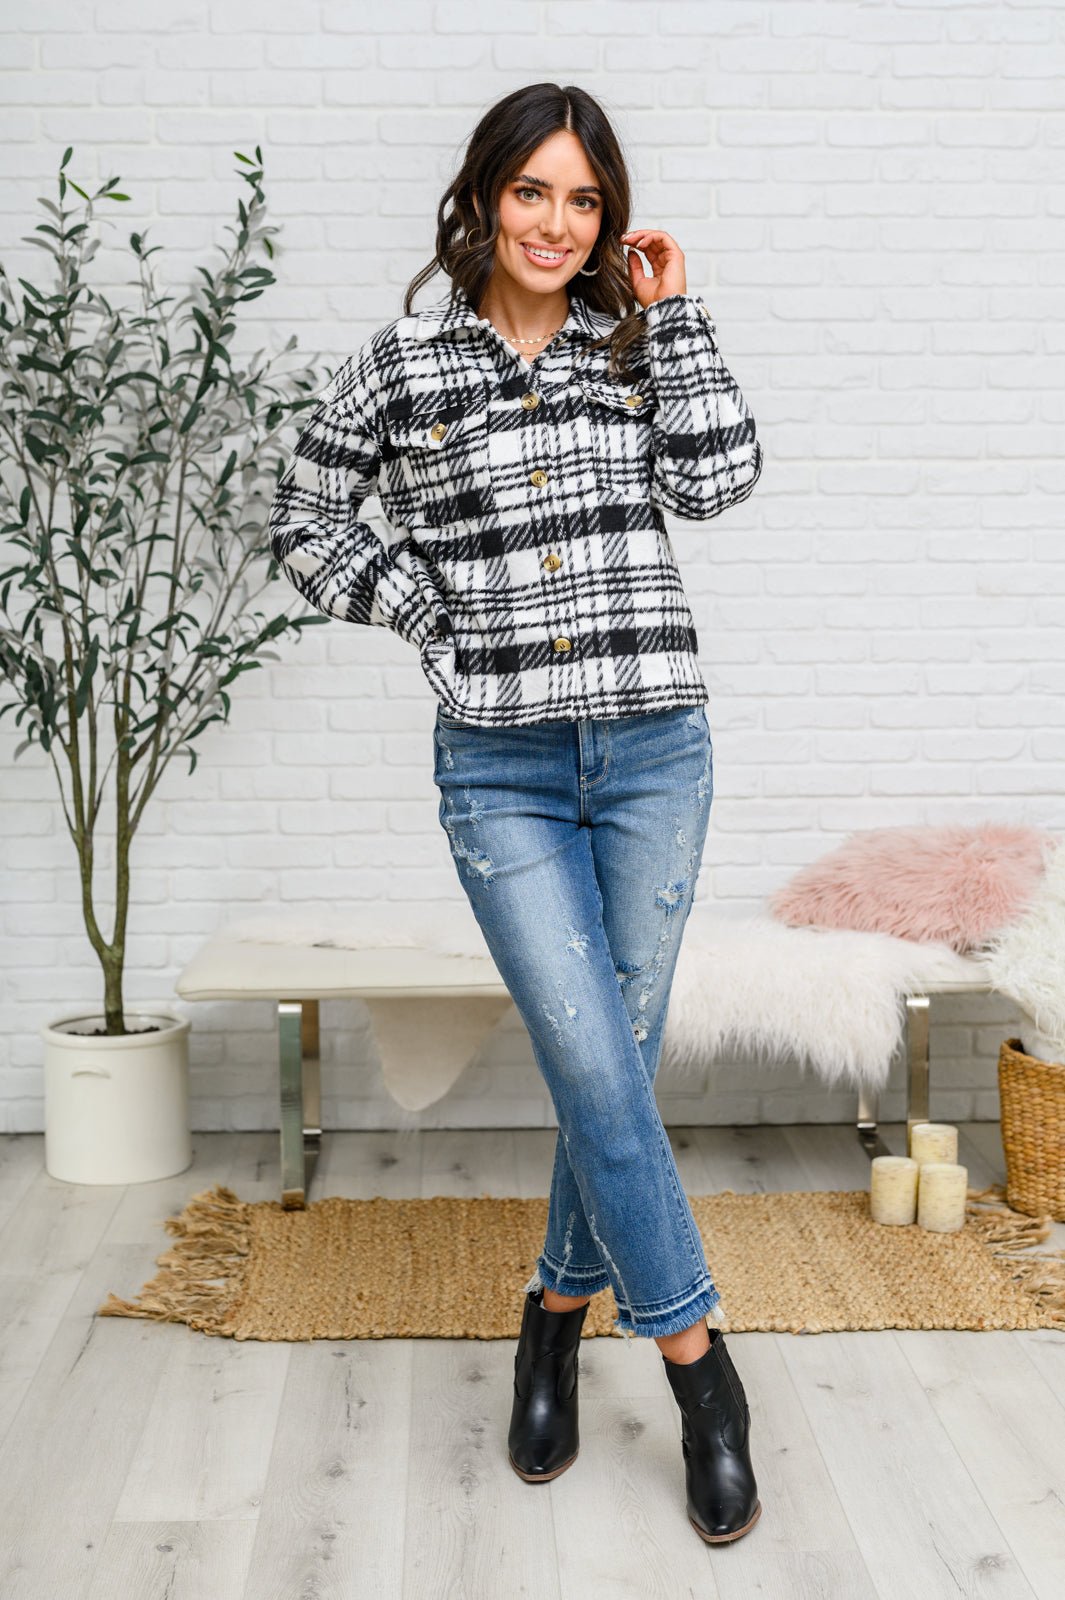 Kate Plaid Jacket in Black & White - Happily Ever Atchison Shop Co.